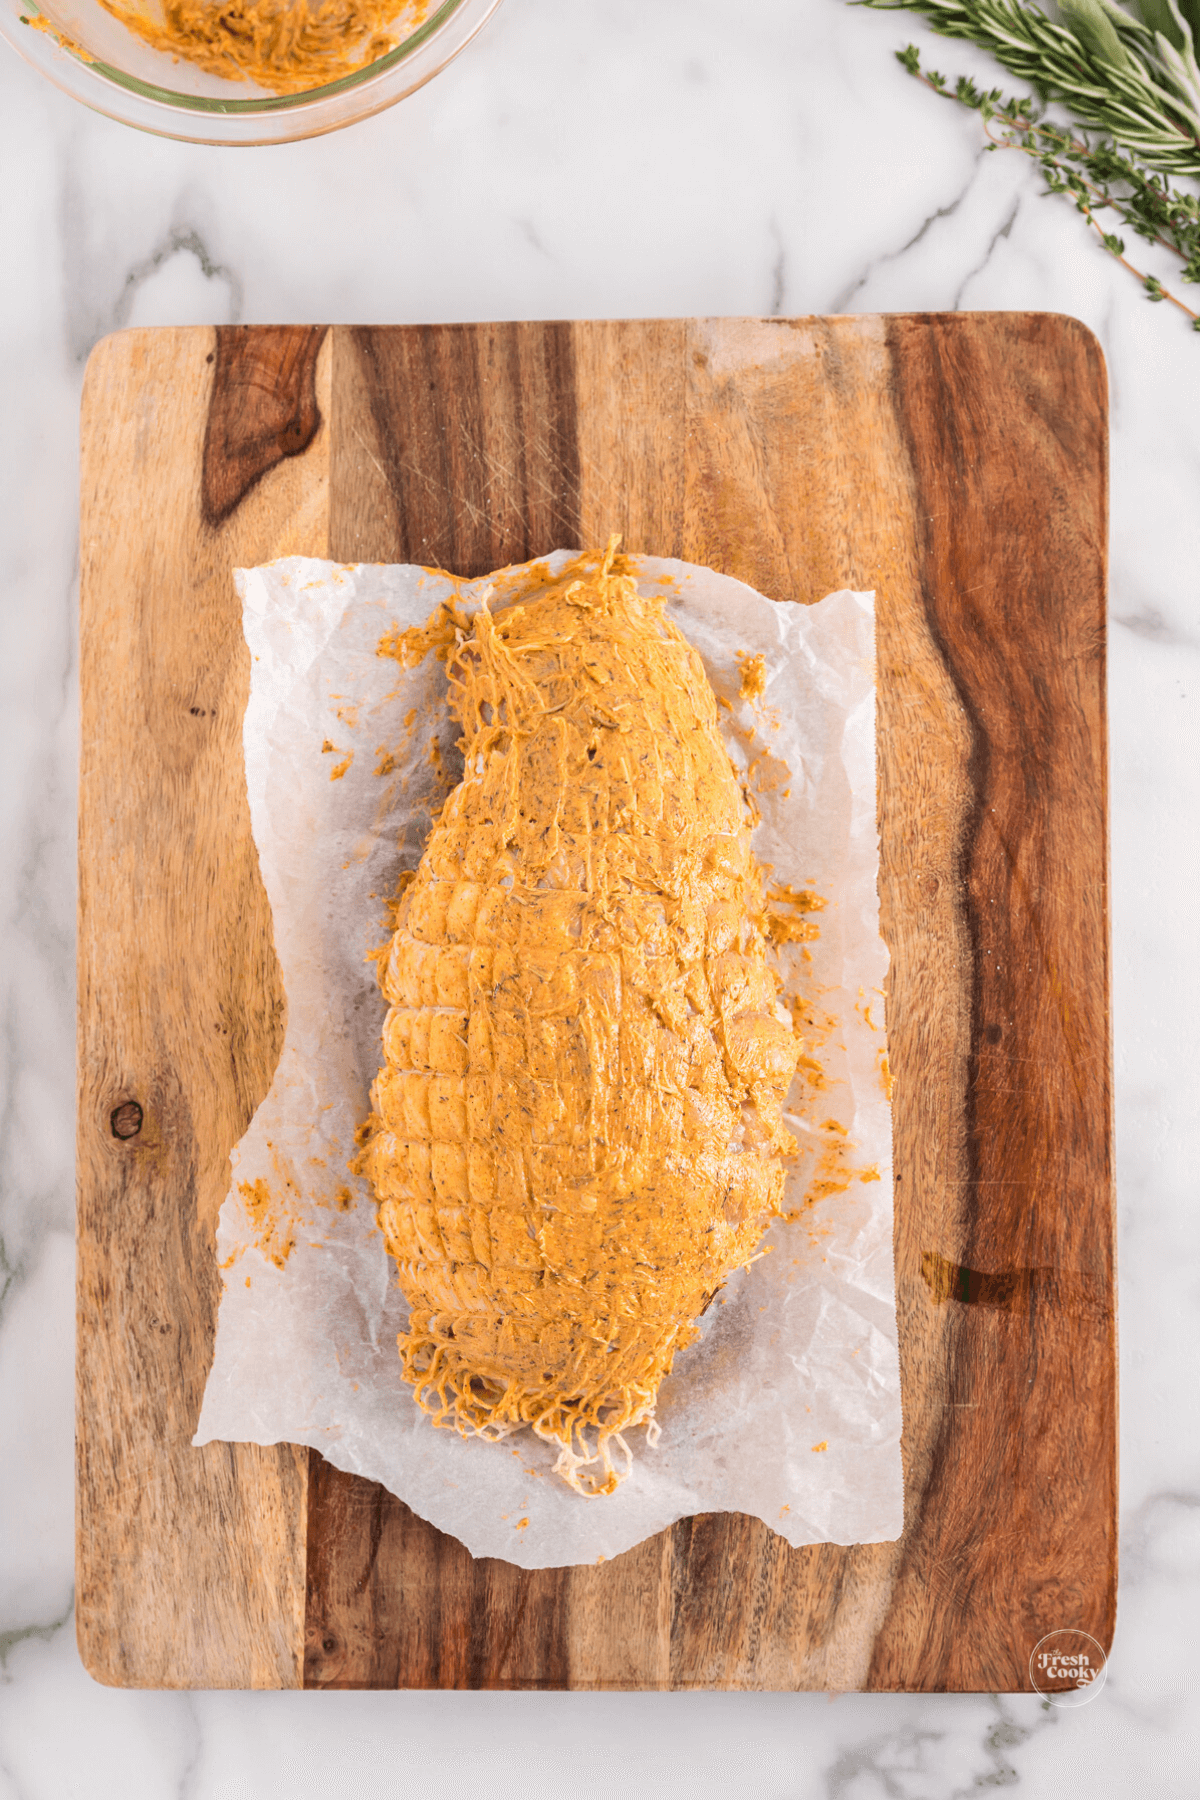 Herbed butter rubbed into turkey breast.